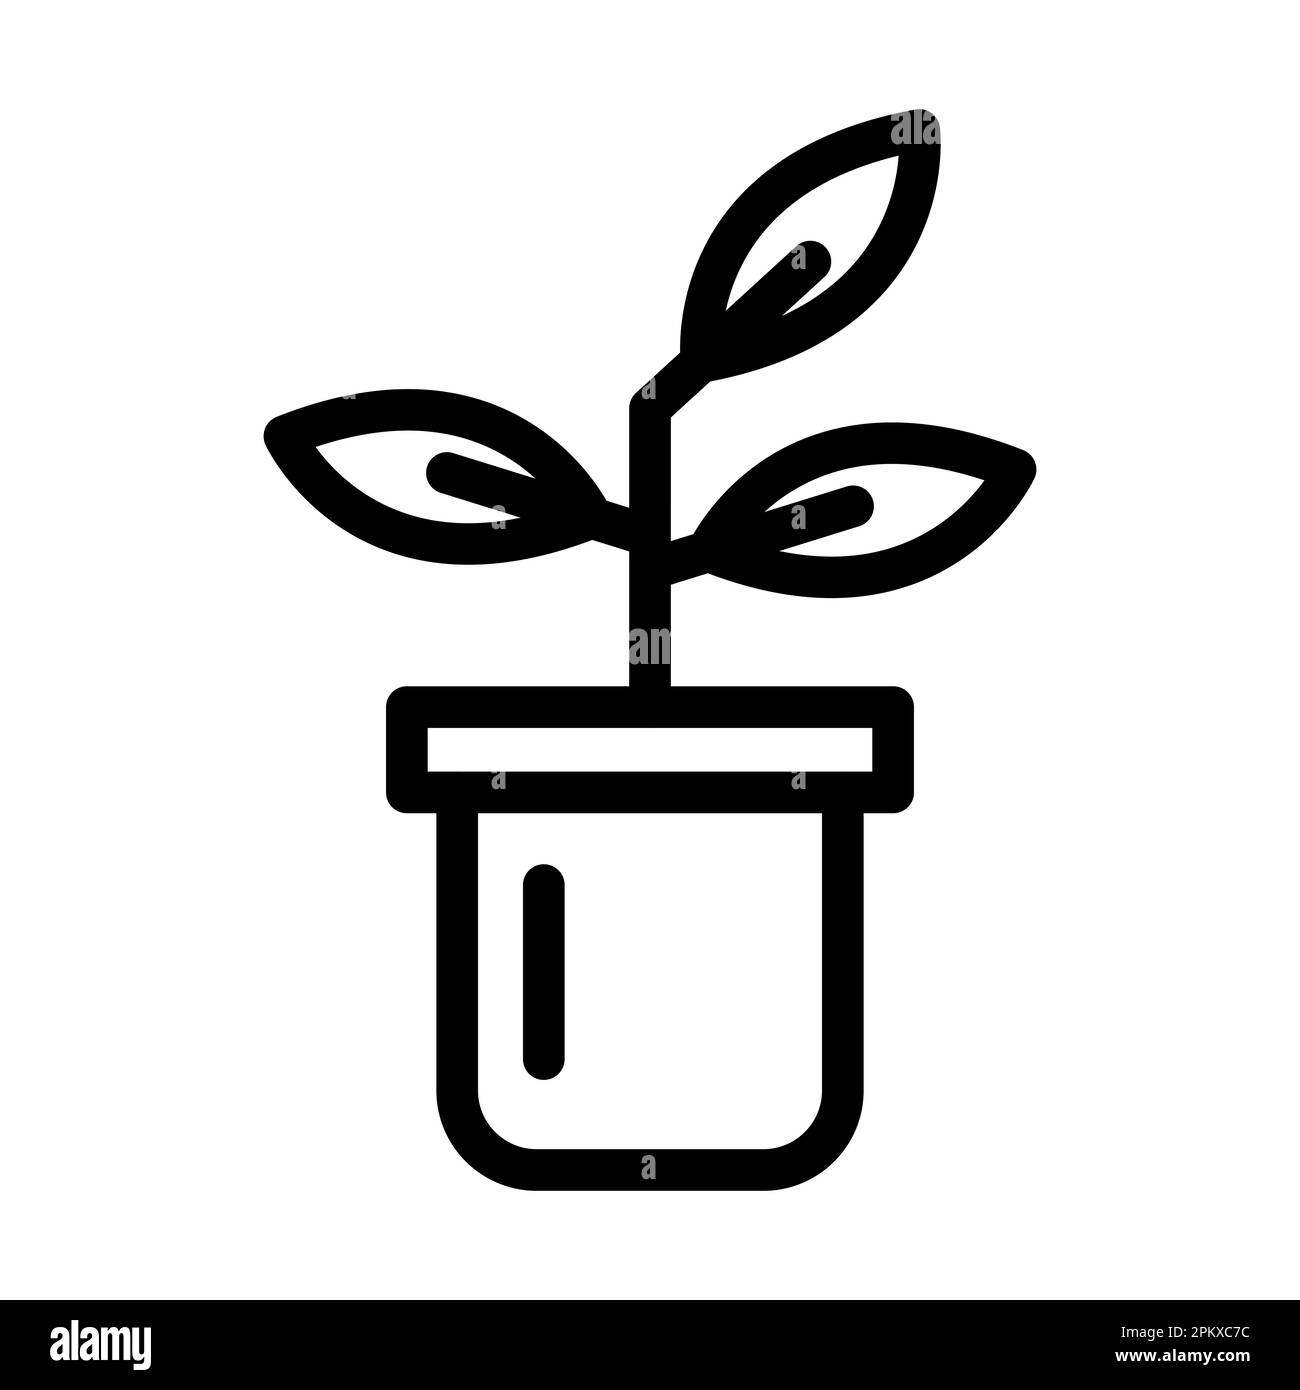 Plants Vector Thick Line Icon For Personal And Commercial Use. Stock Photo